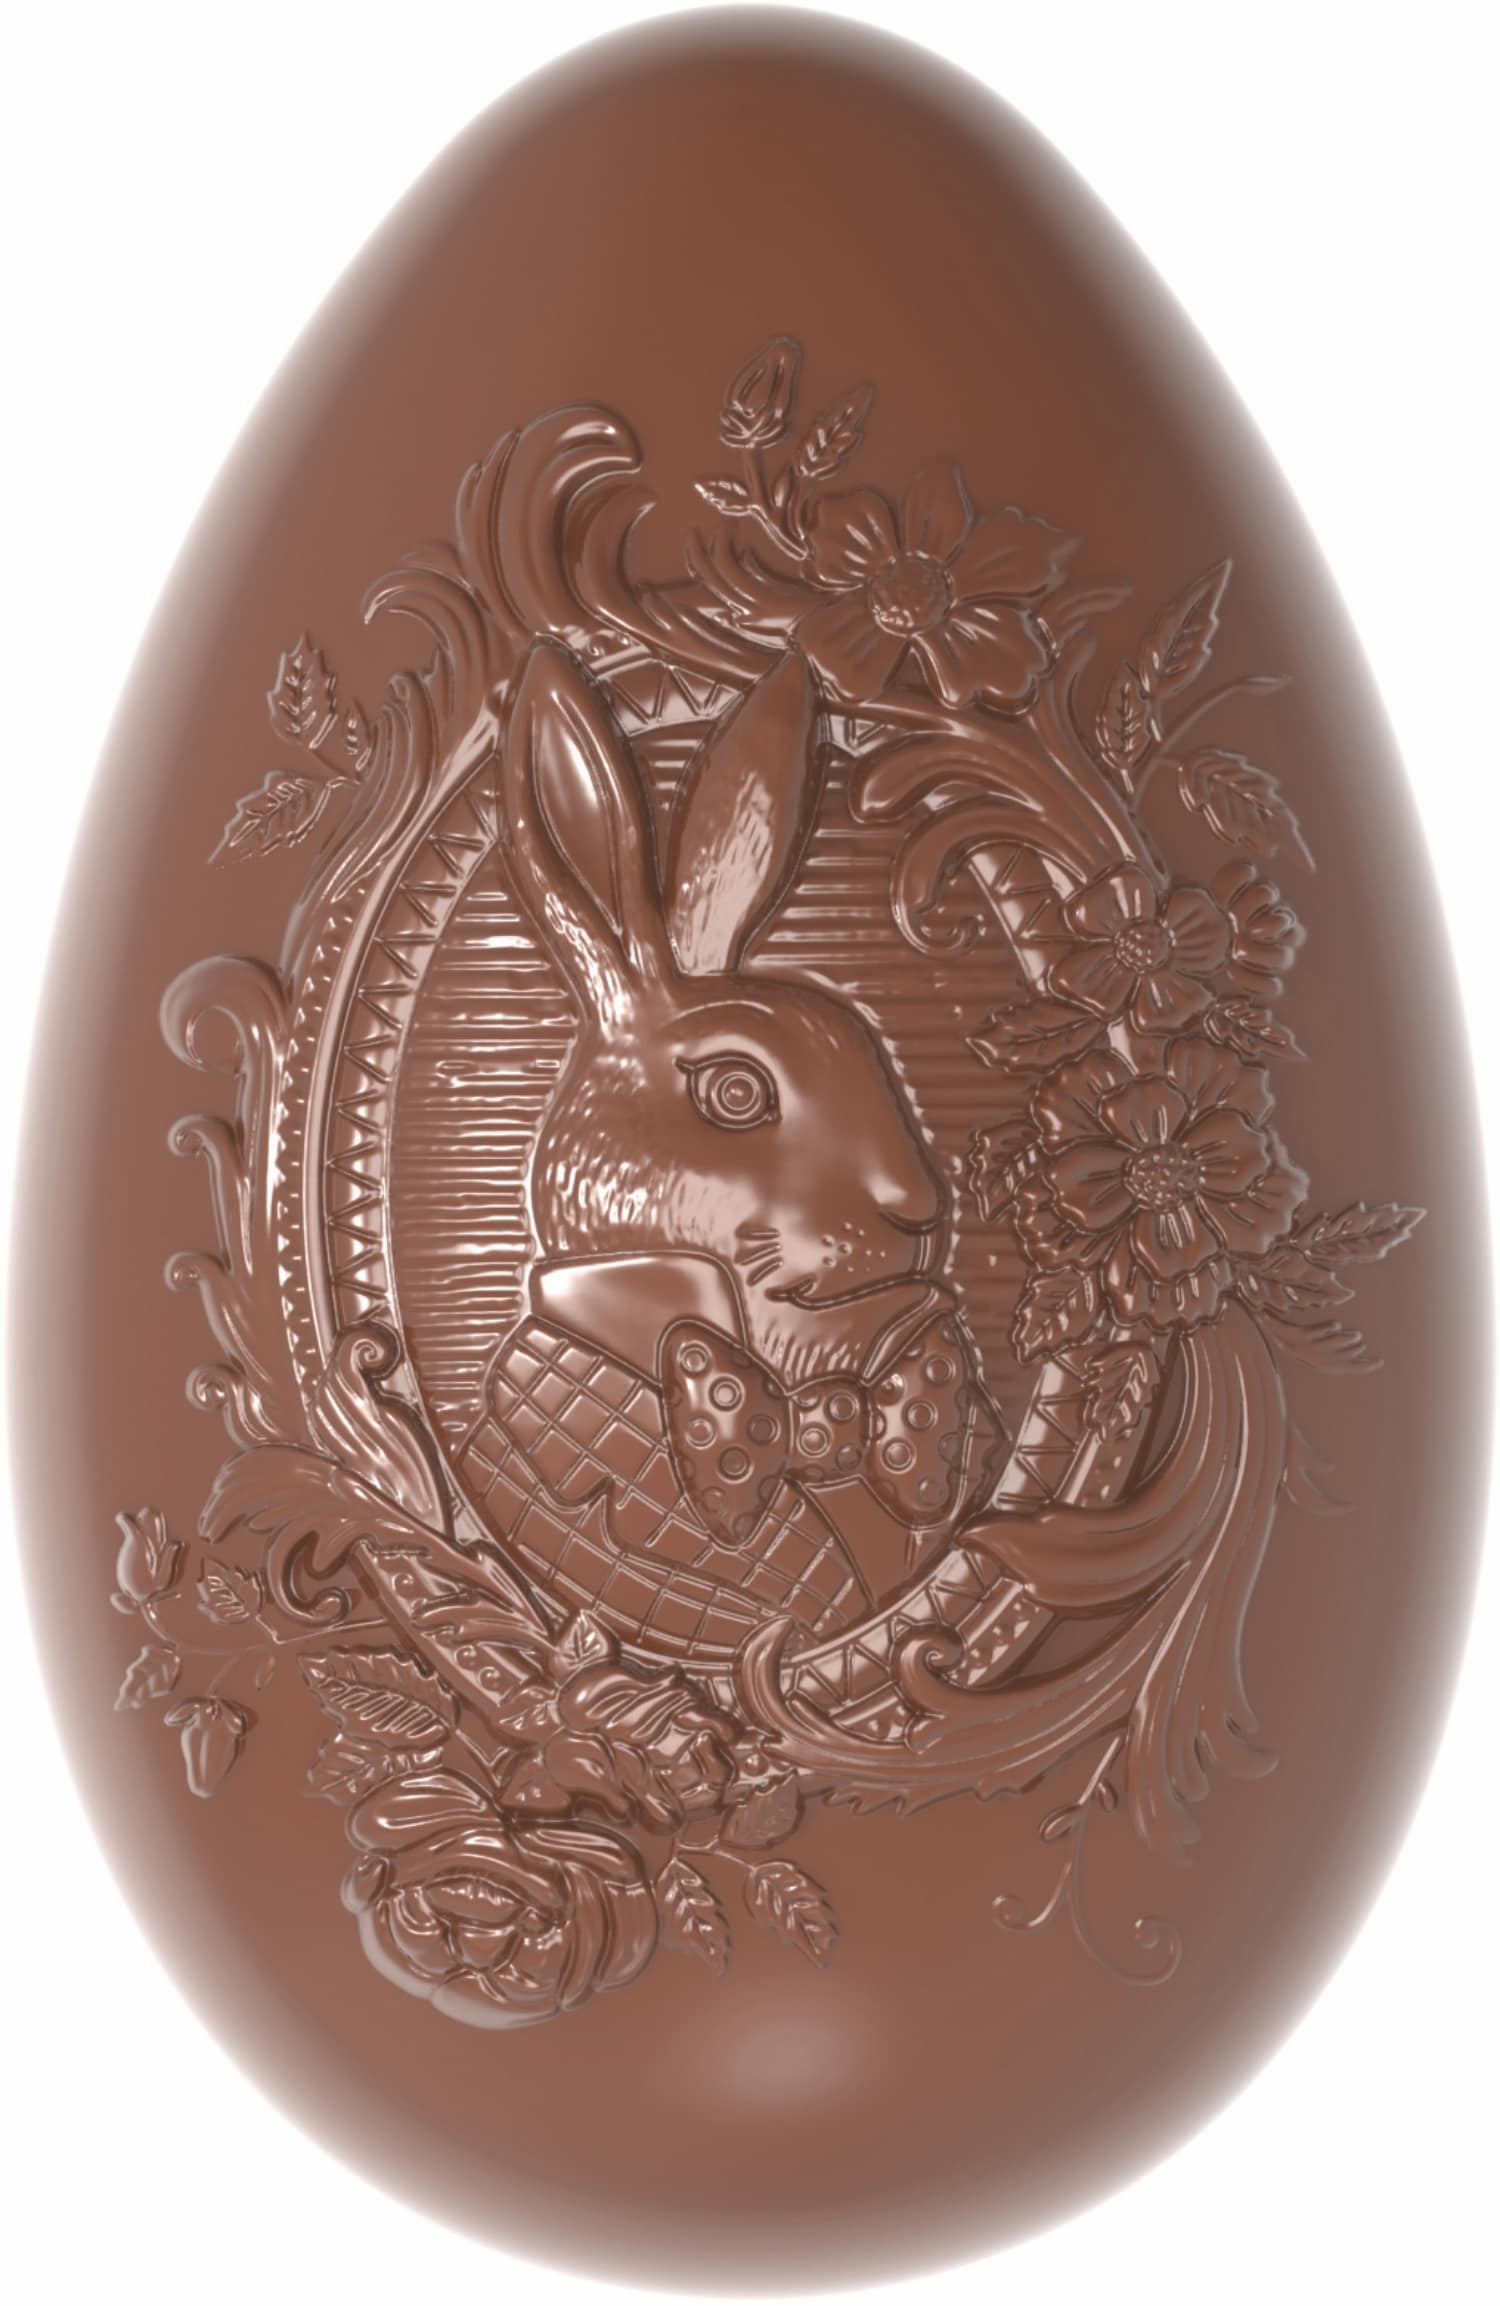 Chocolate mould "Easter egg" 421889 421889